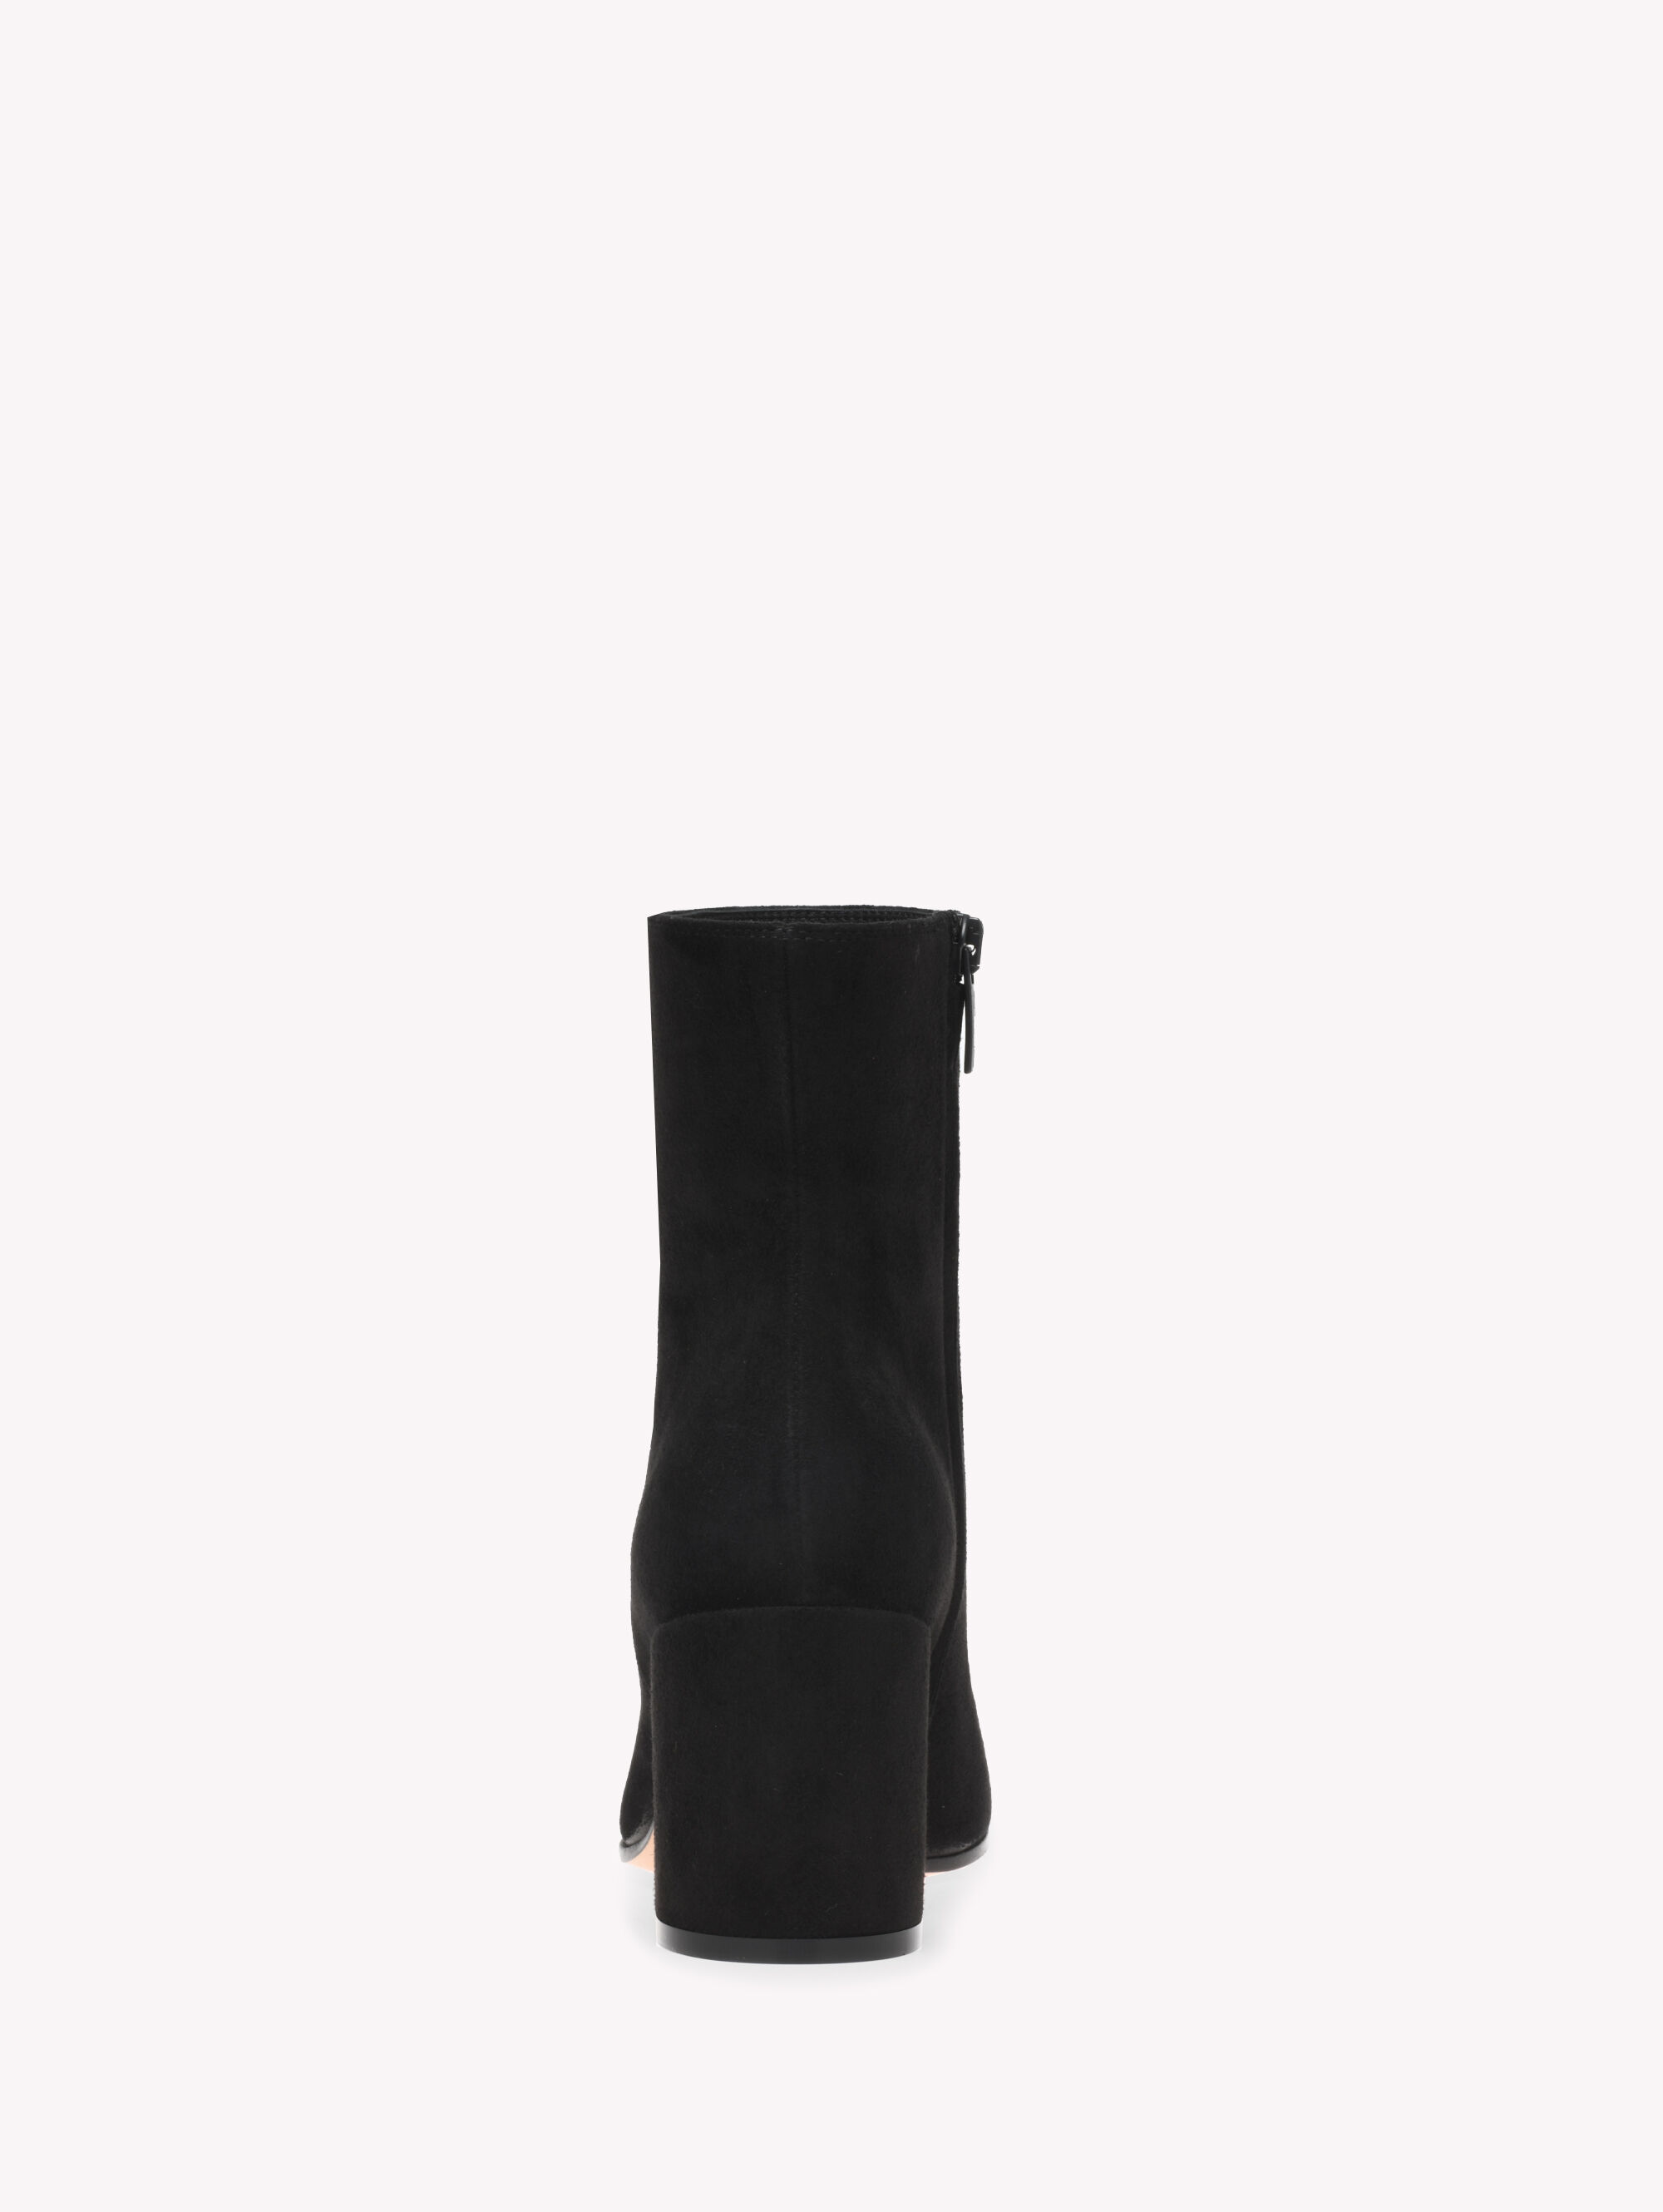 Ankle Boots for Women JOELLE | Gianvito Rossi